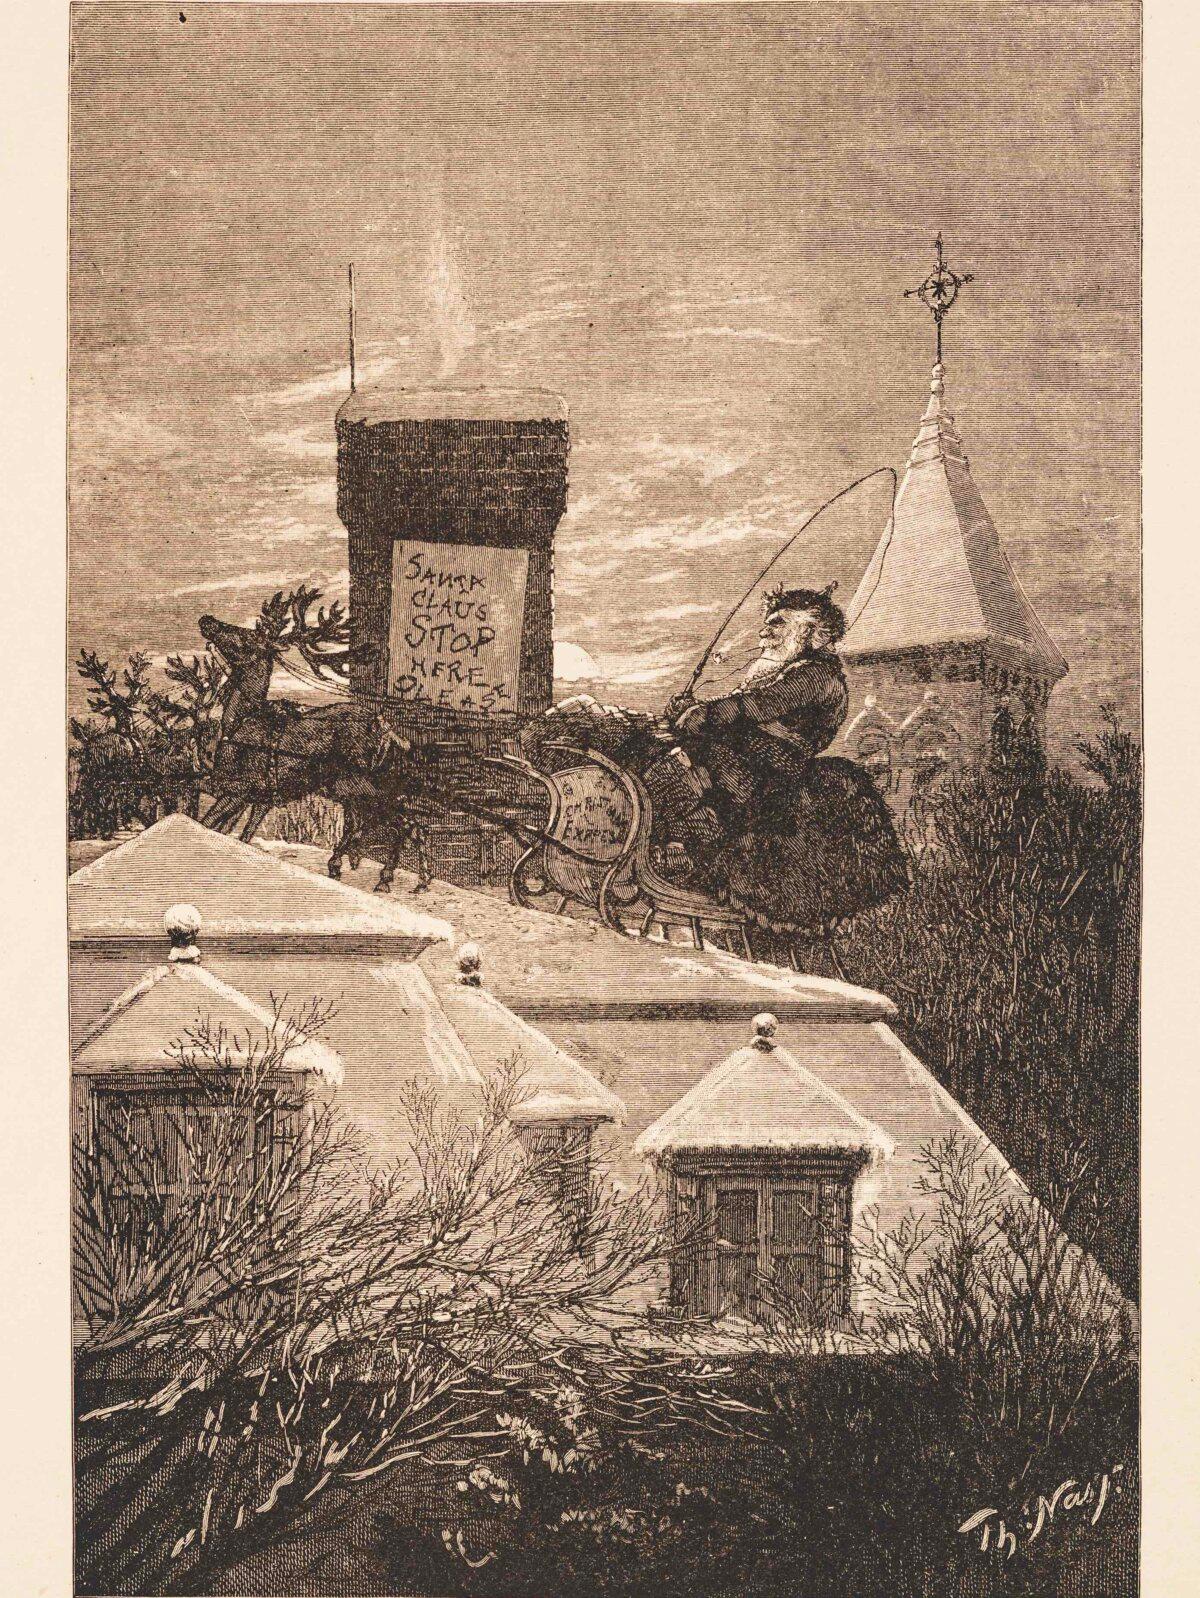 Illustration of “Christmas Station,” with a note on the chimney reading “Santa Claus Stop Here Please,” by Thomas Nast, 1889. Library of Congress. (Public Domain)